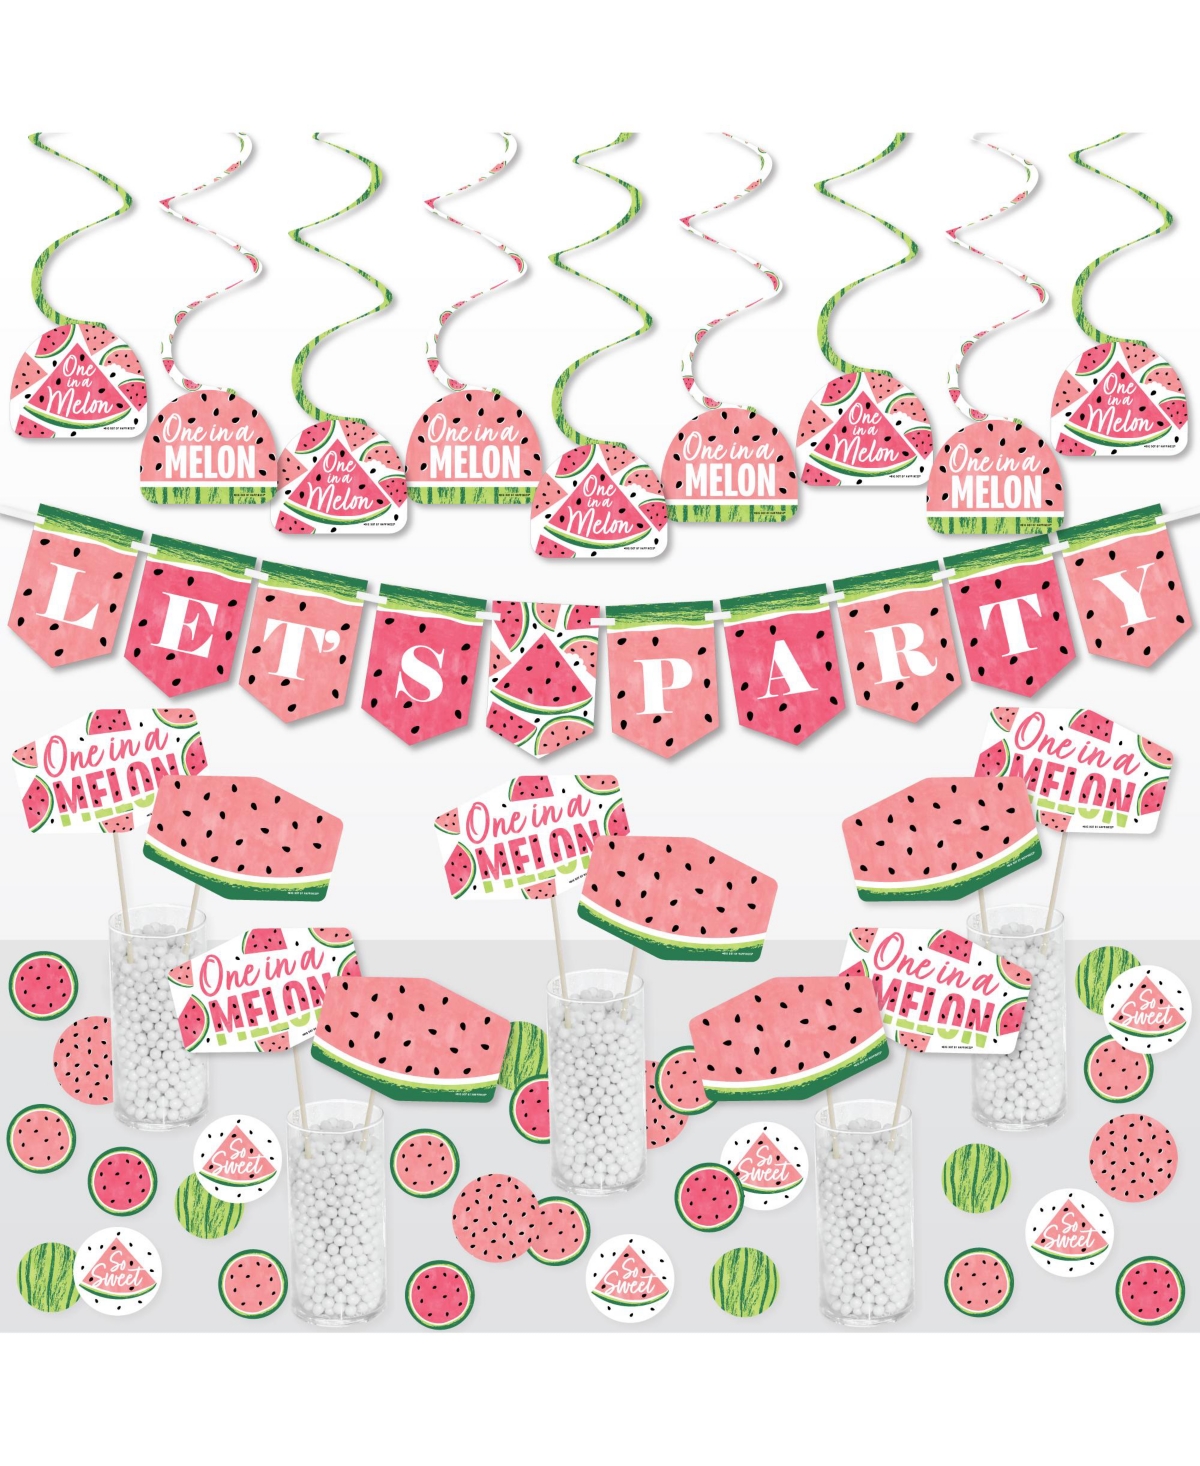 Big Dot of Happiness Sweet Watermelon - Fruit Party Supplies Decoration Kit - Decor Galore Party Pack - 51 Pieces